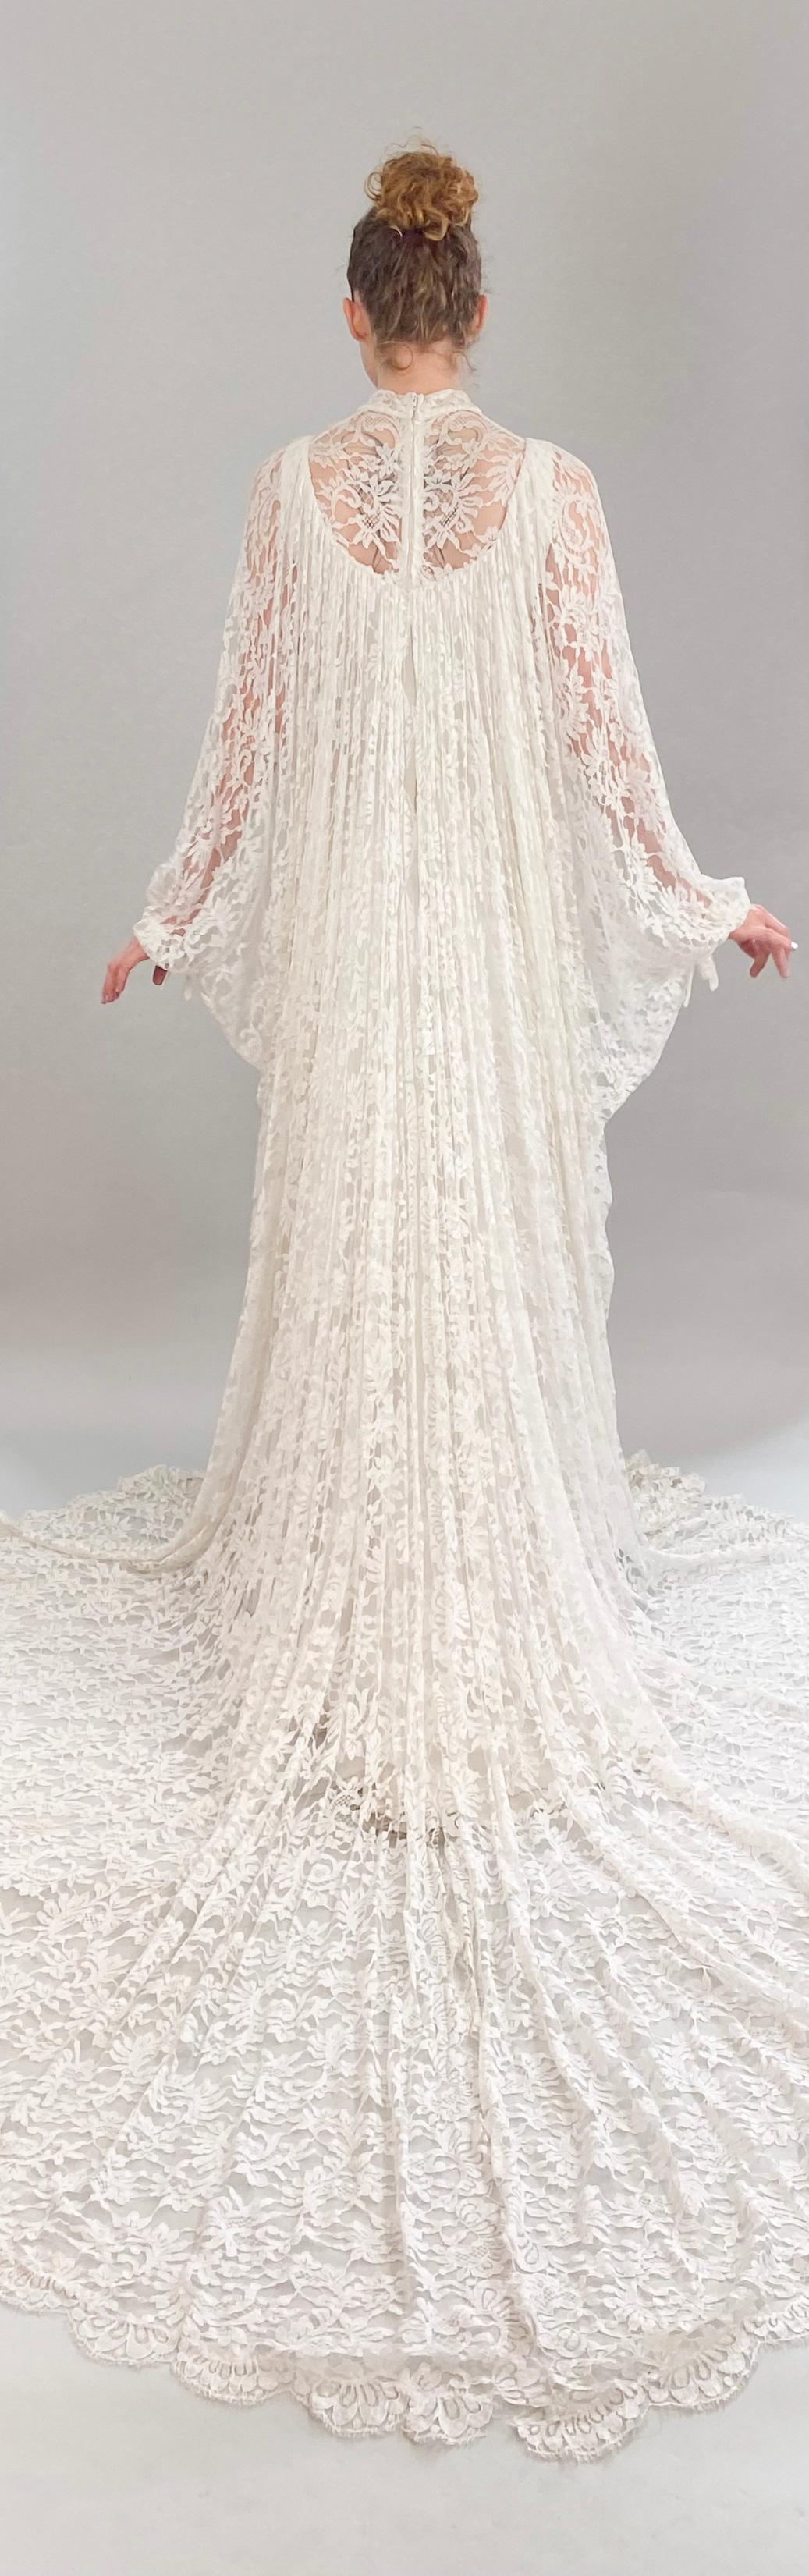 Vintage White Lace Bridal Gown with Batwing Sleeves & Train For Sale 1